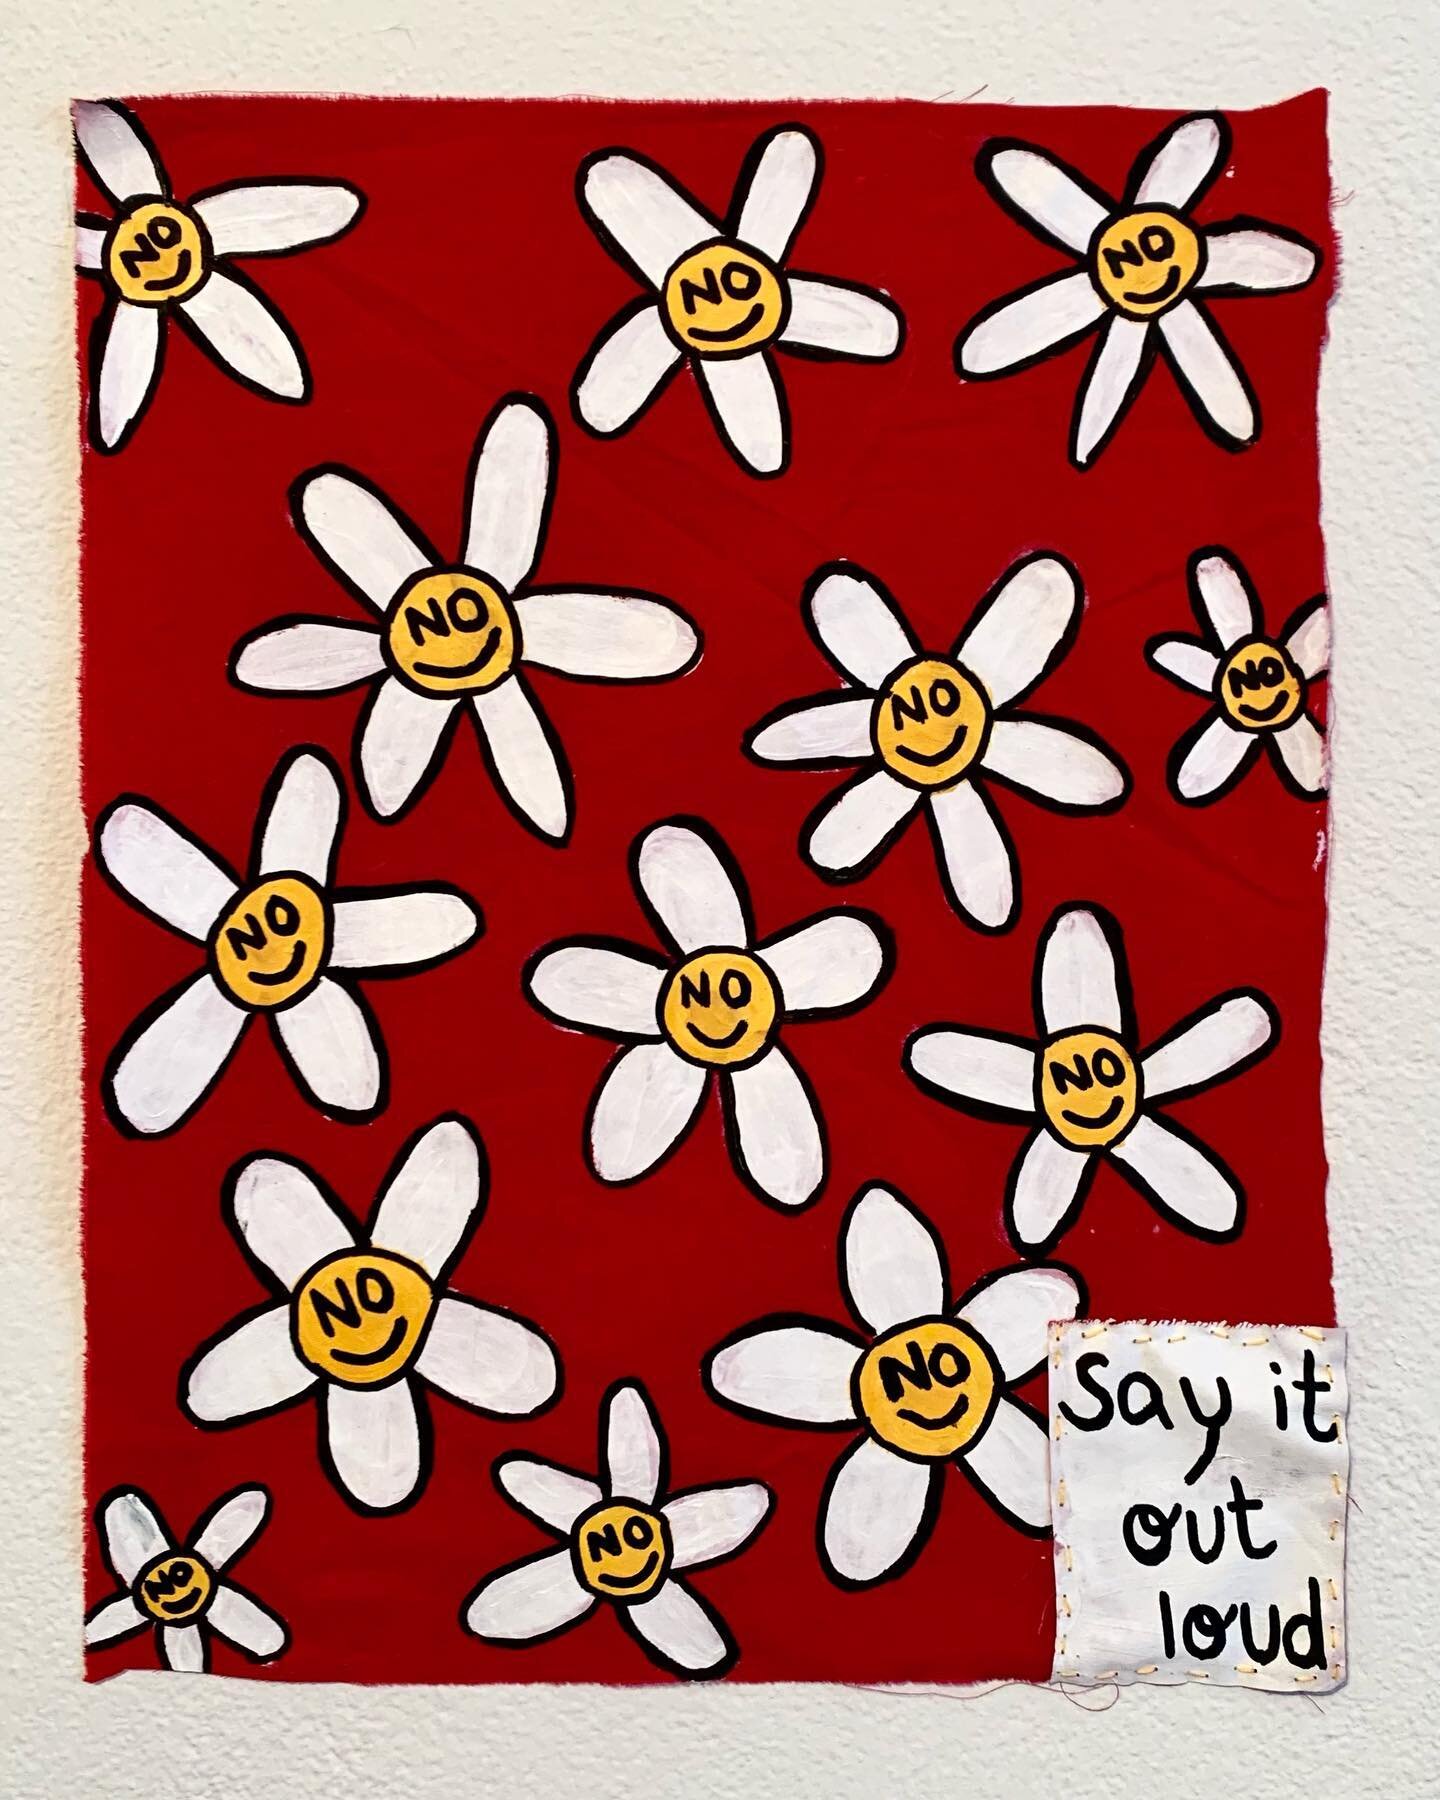 Today a client sent me this art piece that they had made after our session yesterday. We talked about boundaries and the importance of saying no out loud.

Image description: red background with white flowers and yellow centres. The middle  of each f